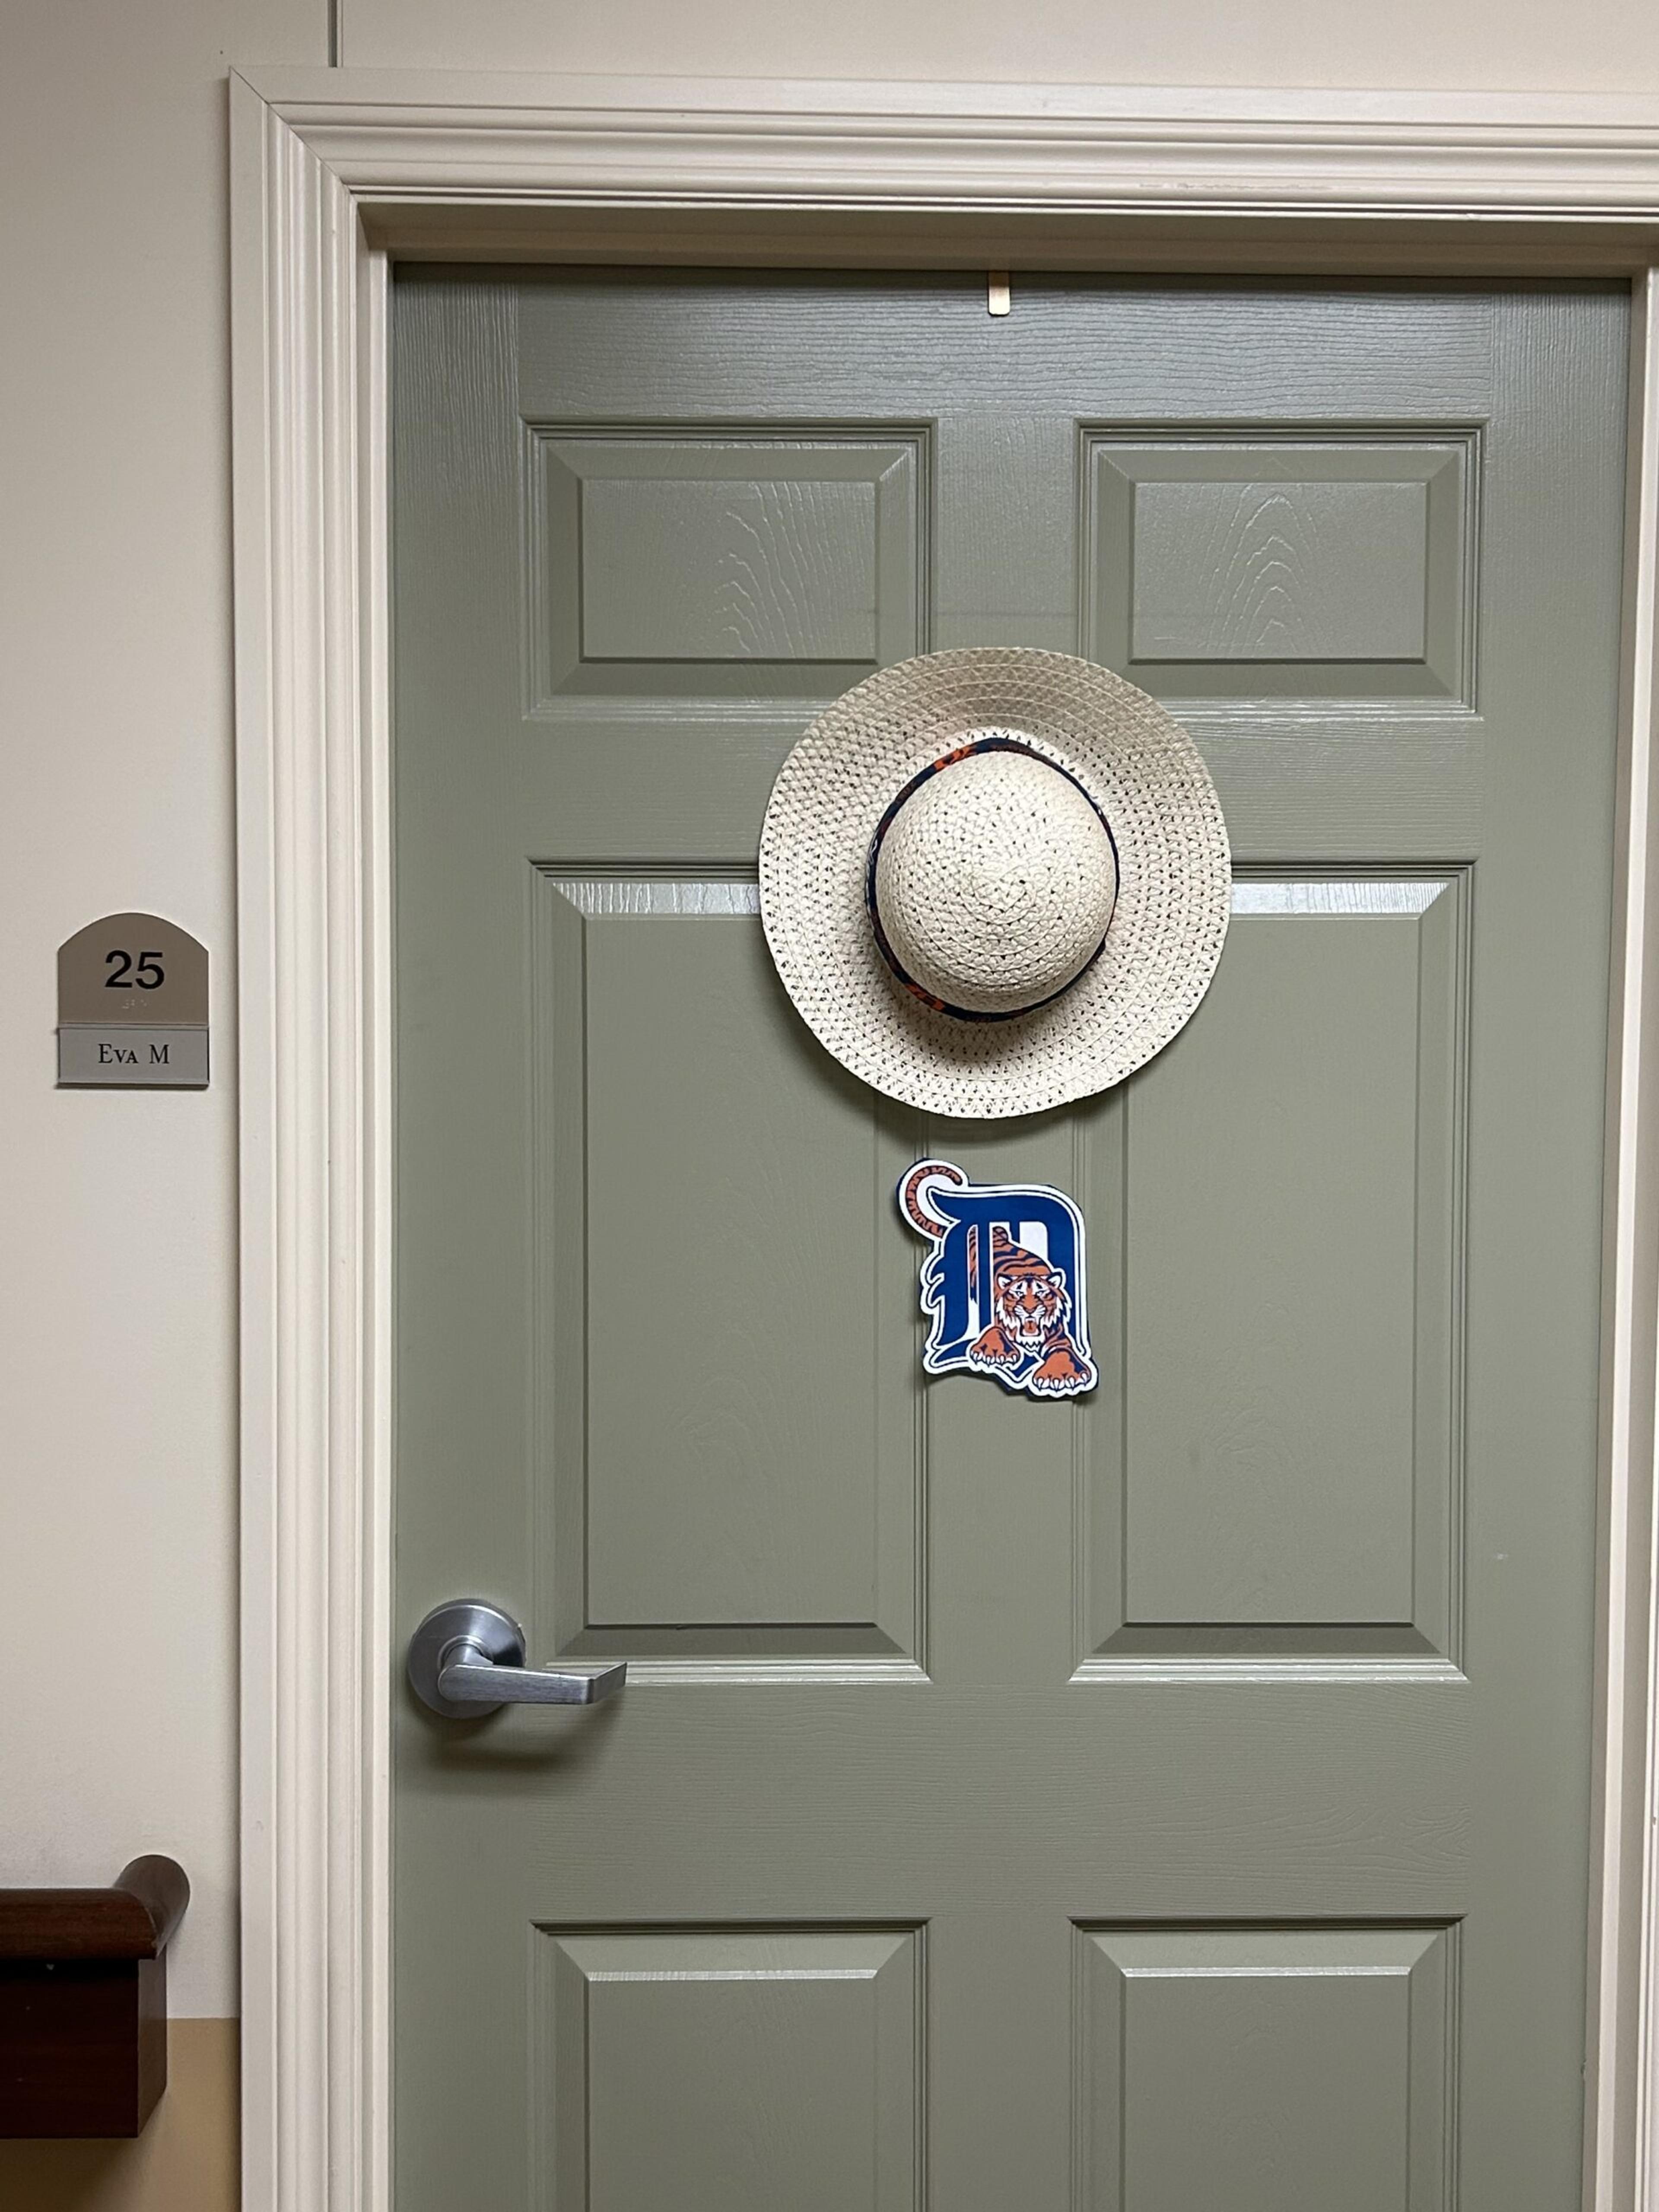 The door to Eva Martin's room at Crestwood Village Assisted Living features a vintage Detroit Tigers logo.